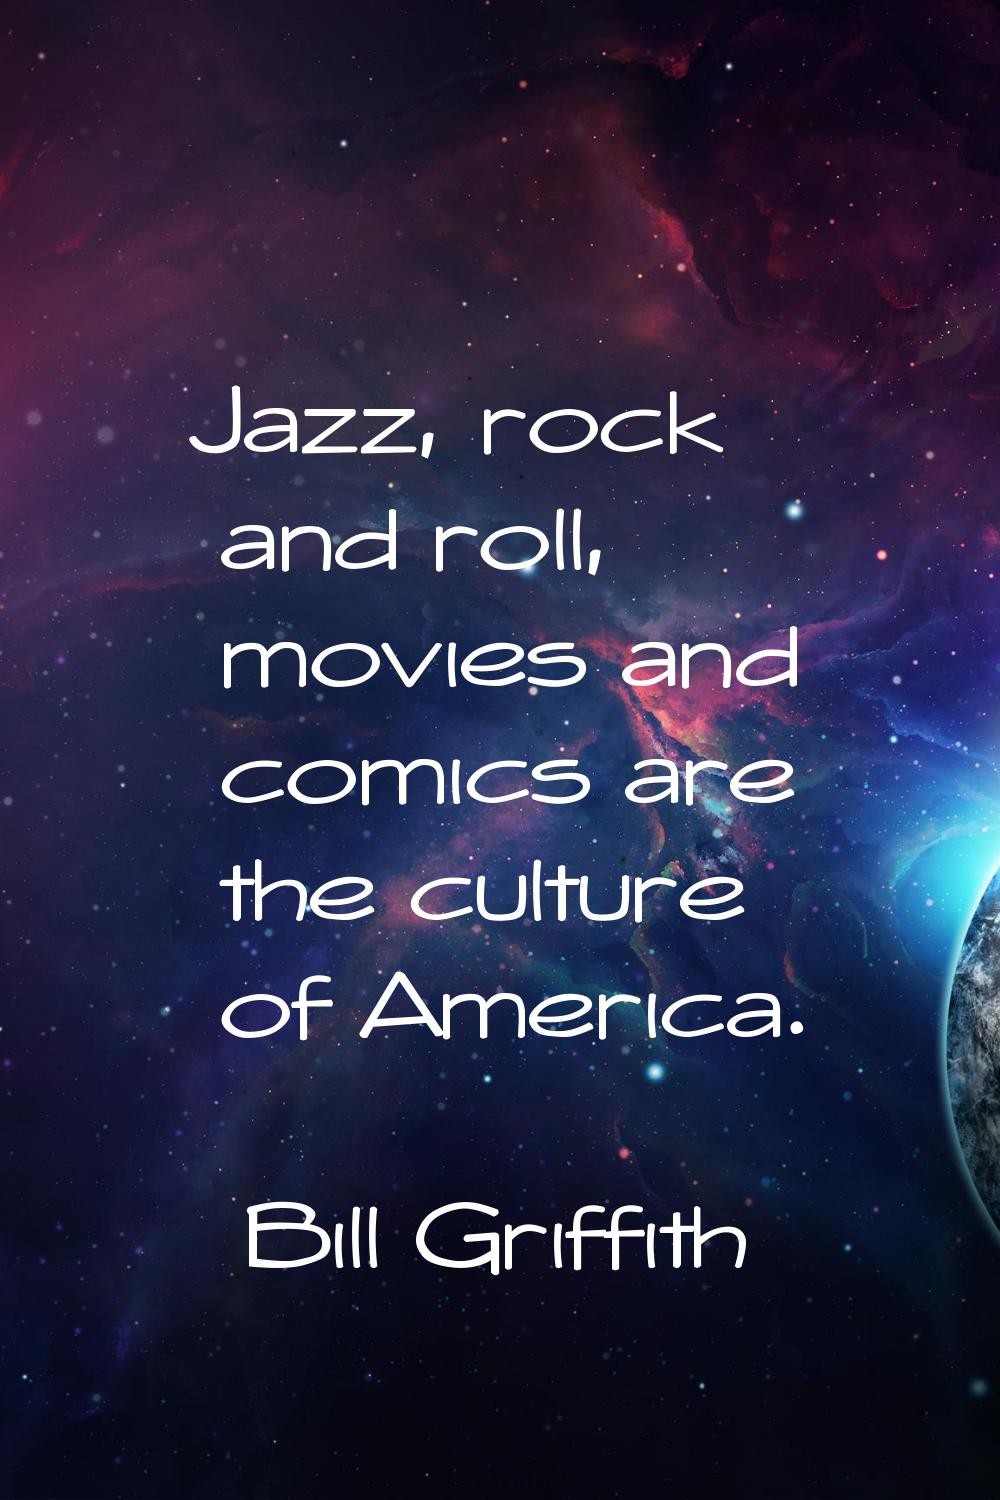 Jazz, rock and roll, movies and comics are the culture of America.